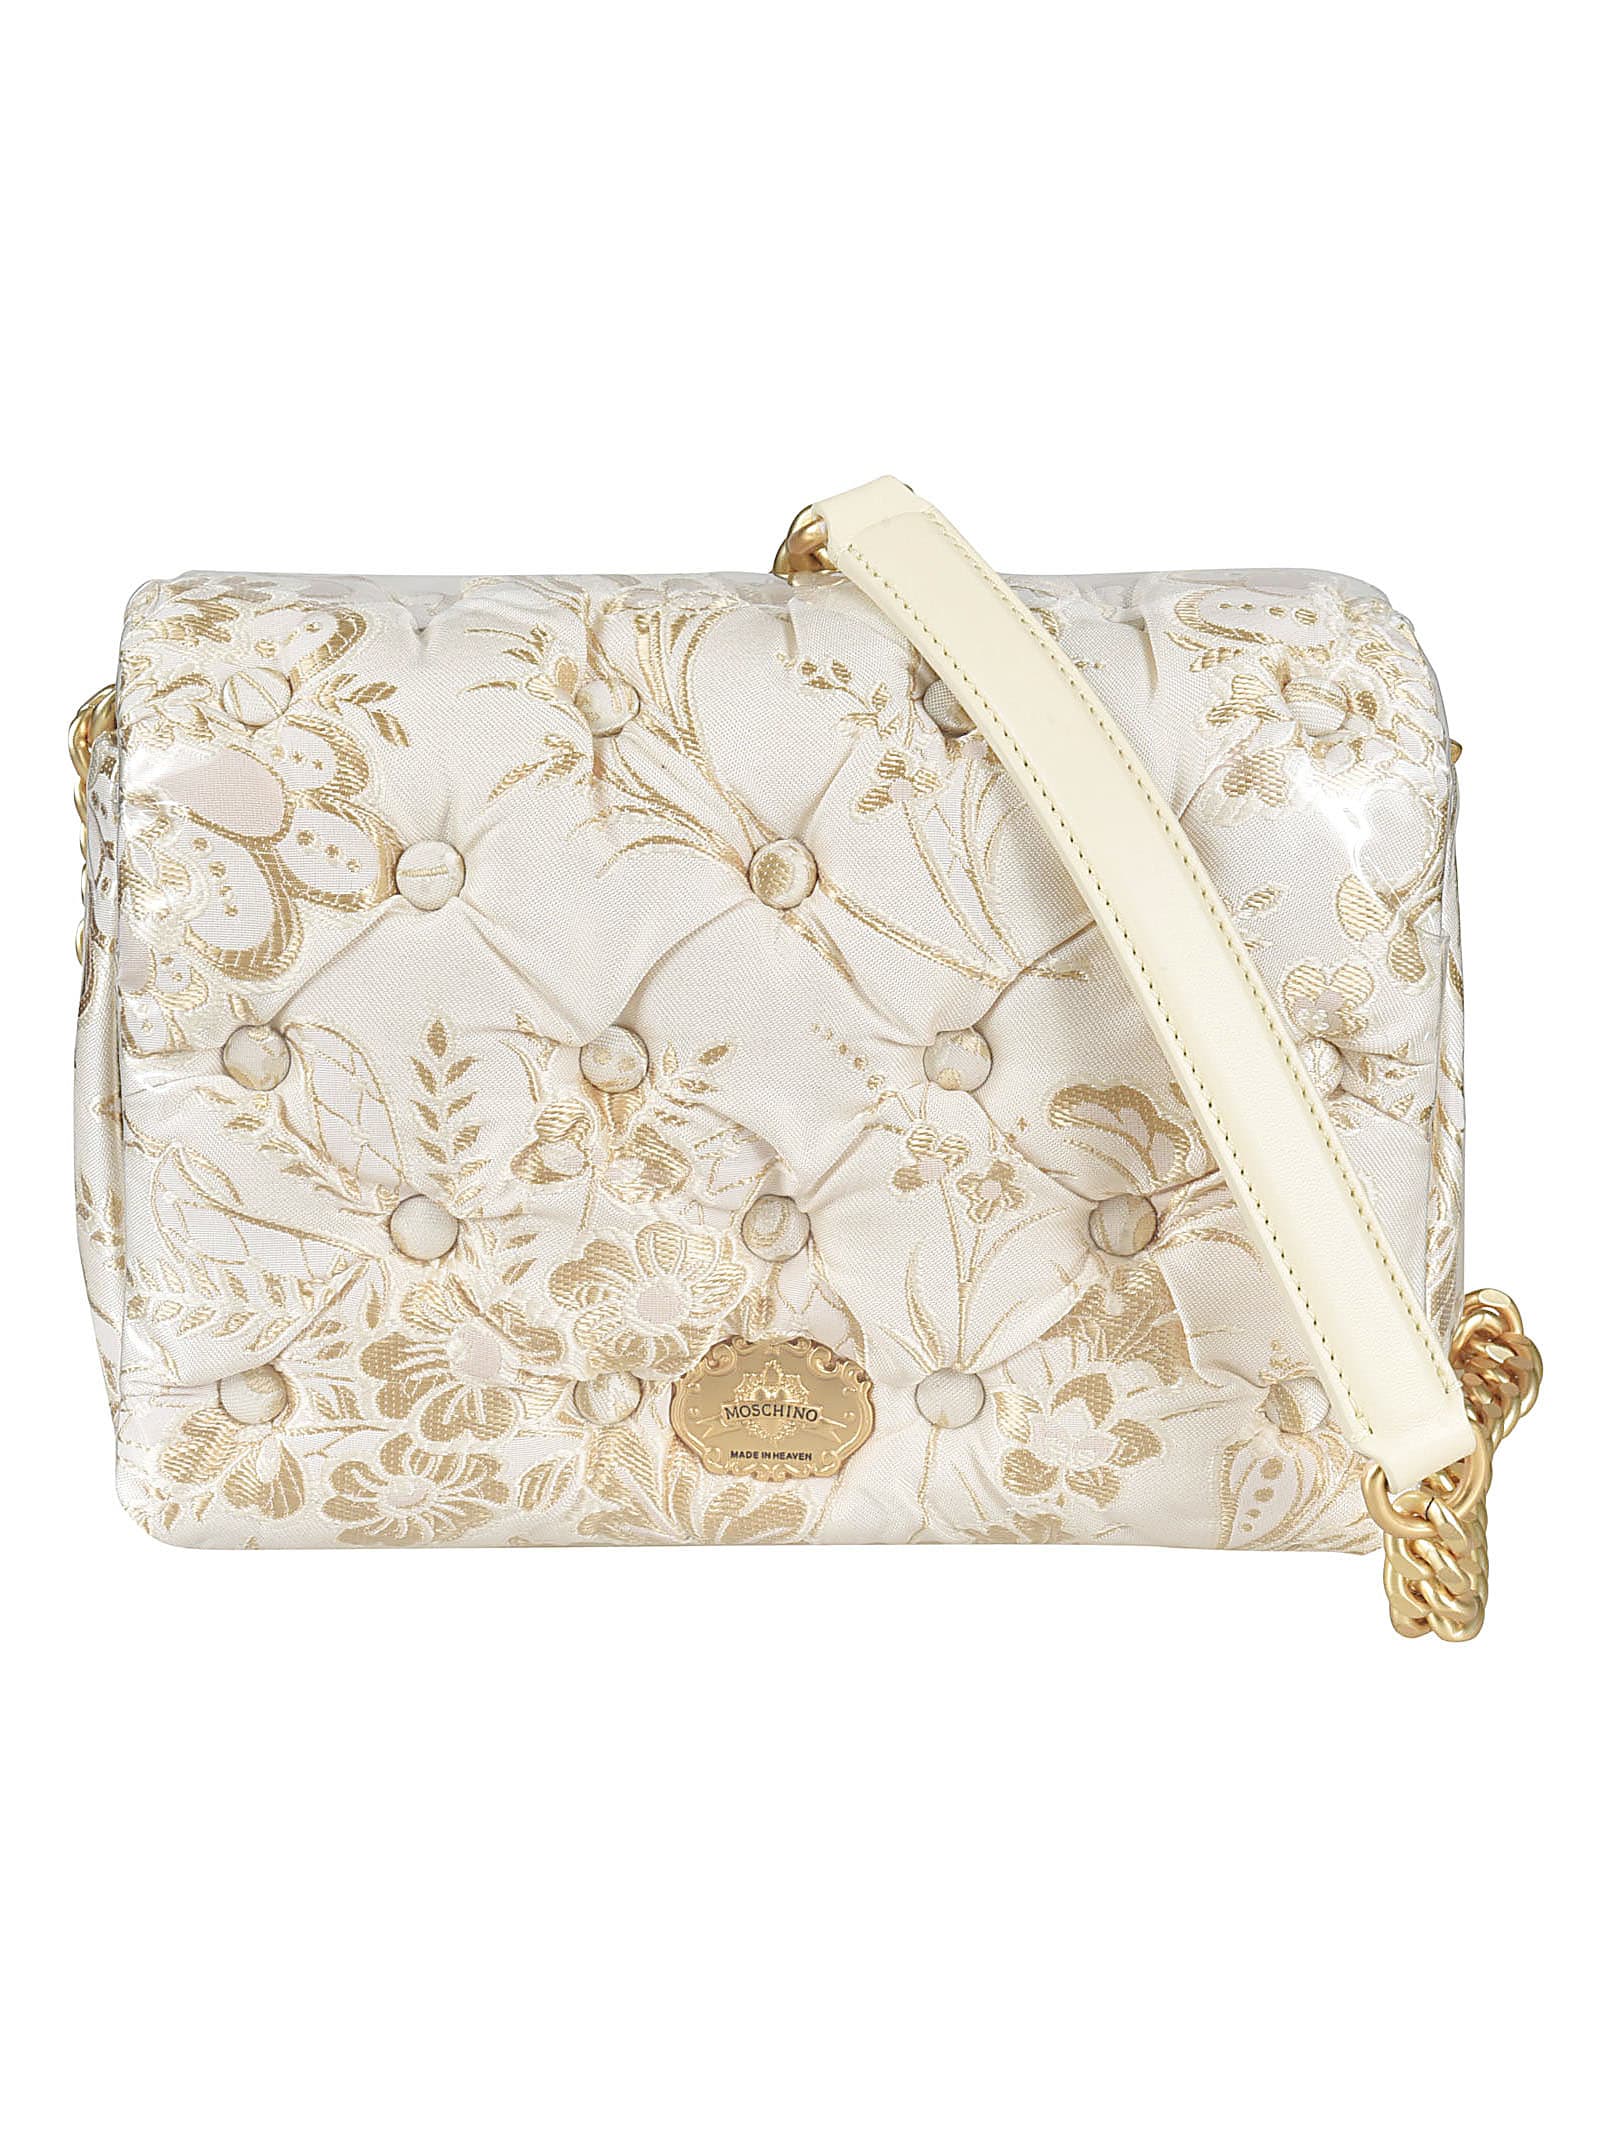 Moschino Floral Embroidered Chain Shoulder Bag In Fantasia